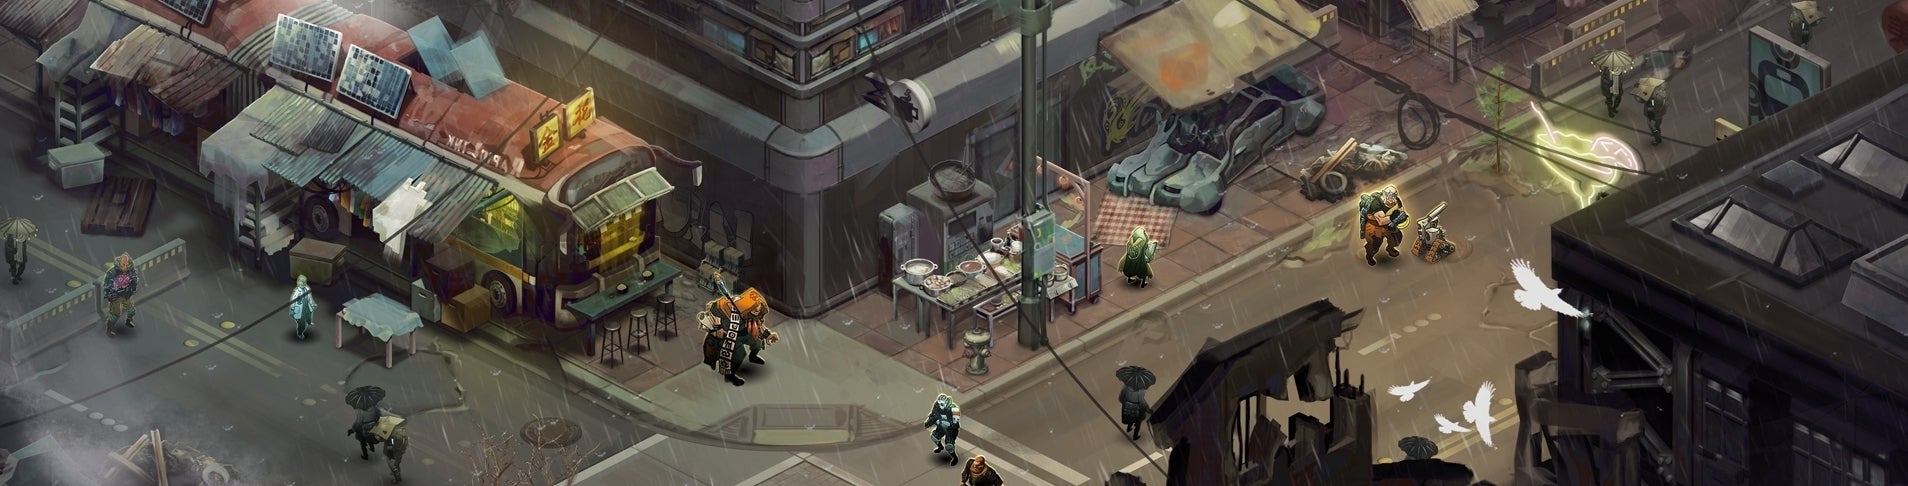 Image for Shadowrun Returns review